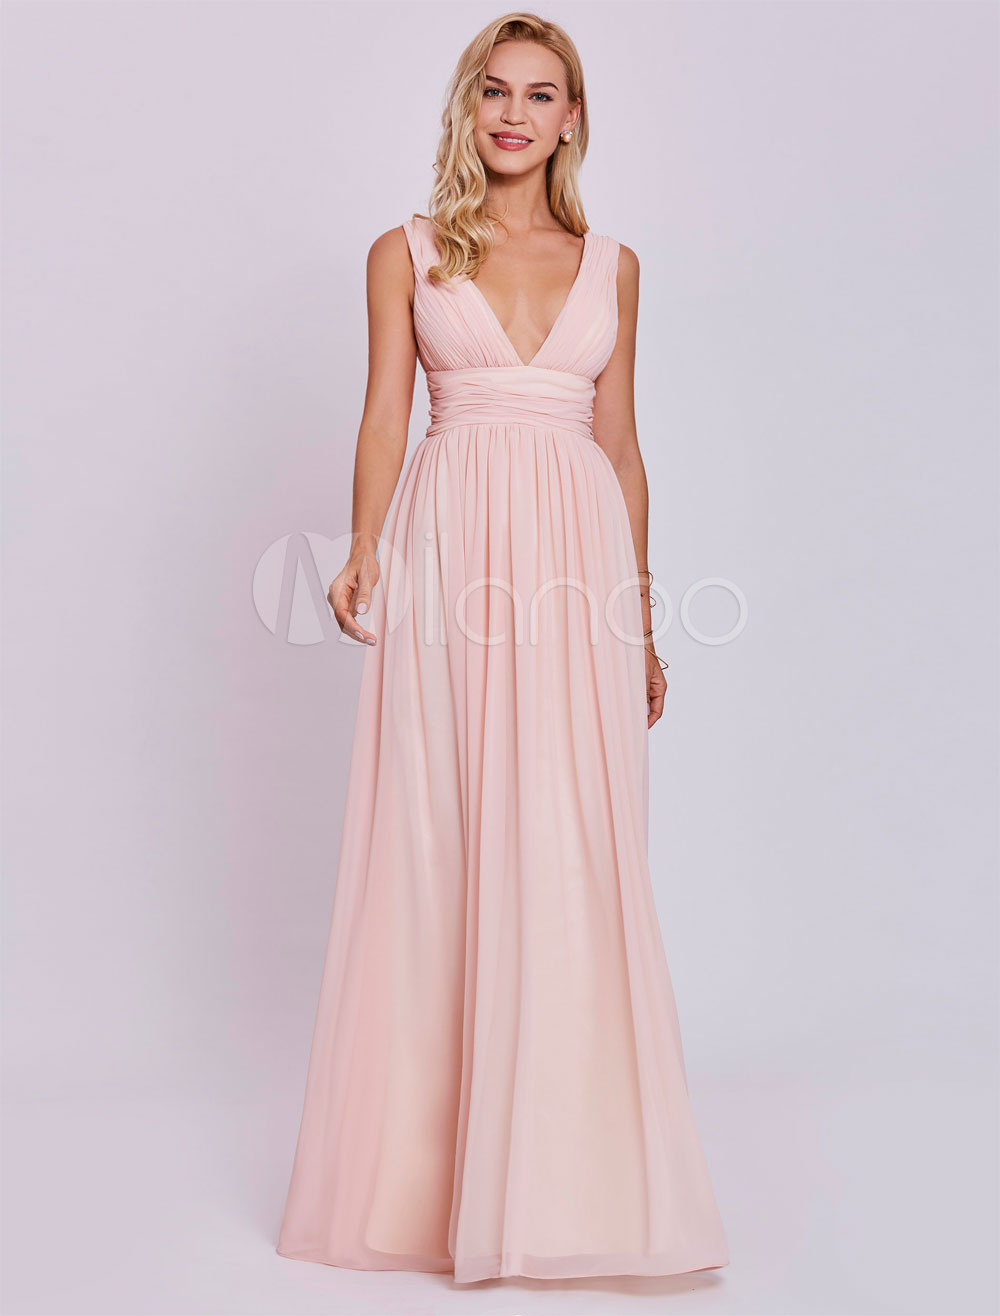 Prom Dresses Long Soft Pink Evening Gown Sexy V Neck Plunging Ruched Chiffon Floor Length Formal Dress (Wedding Cheap Party Dress) photo